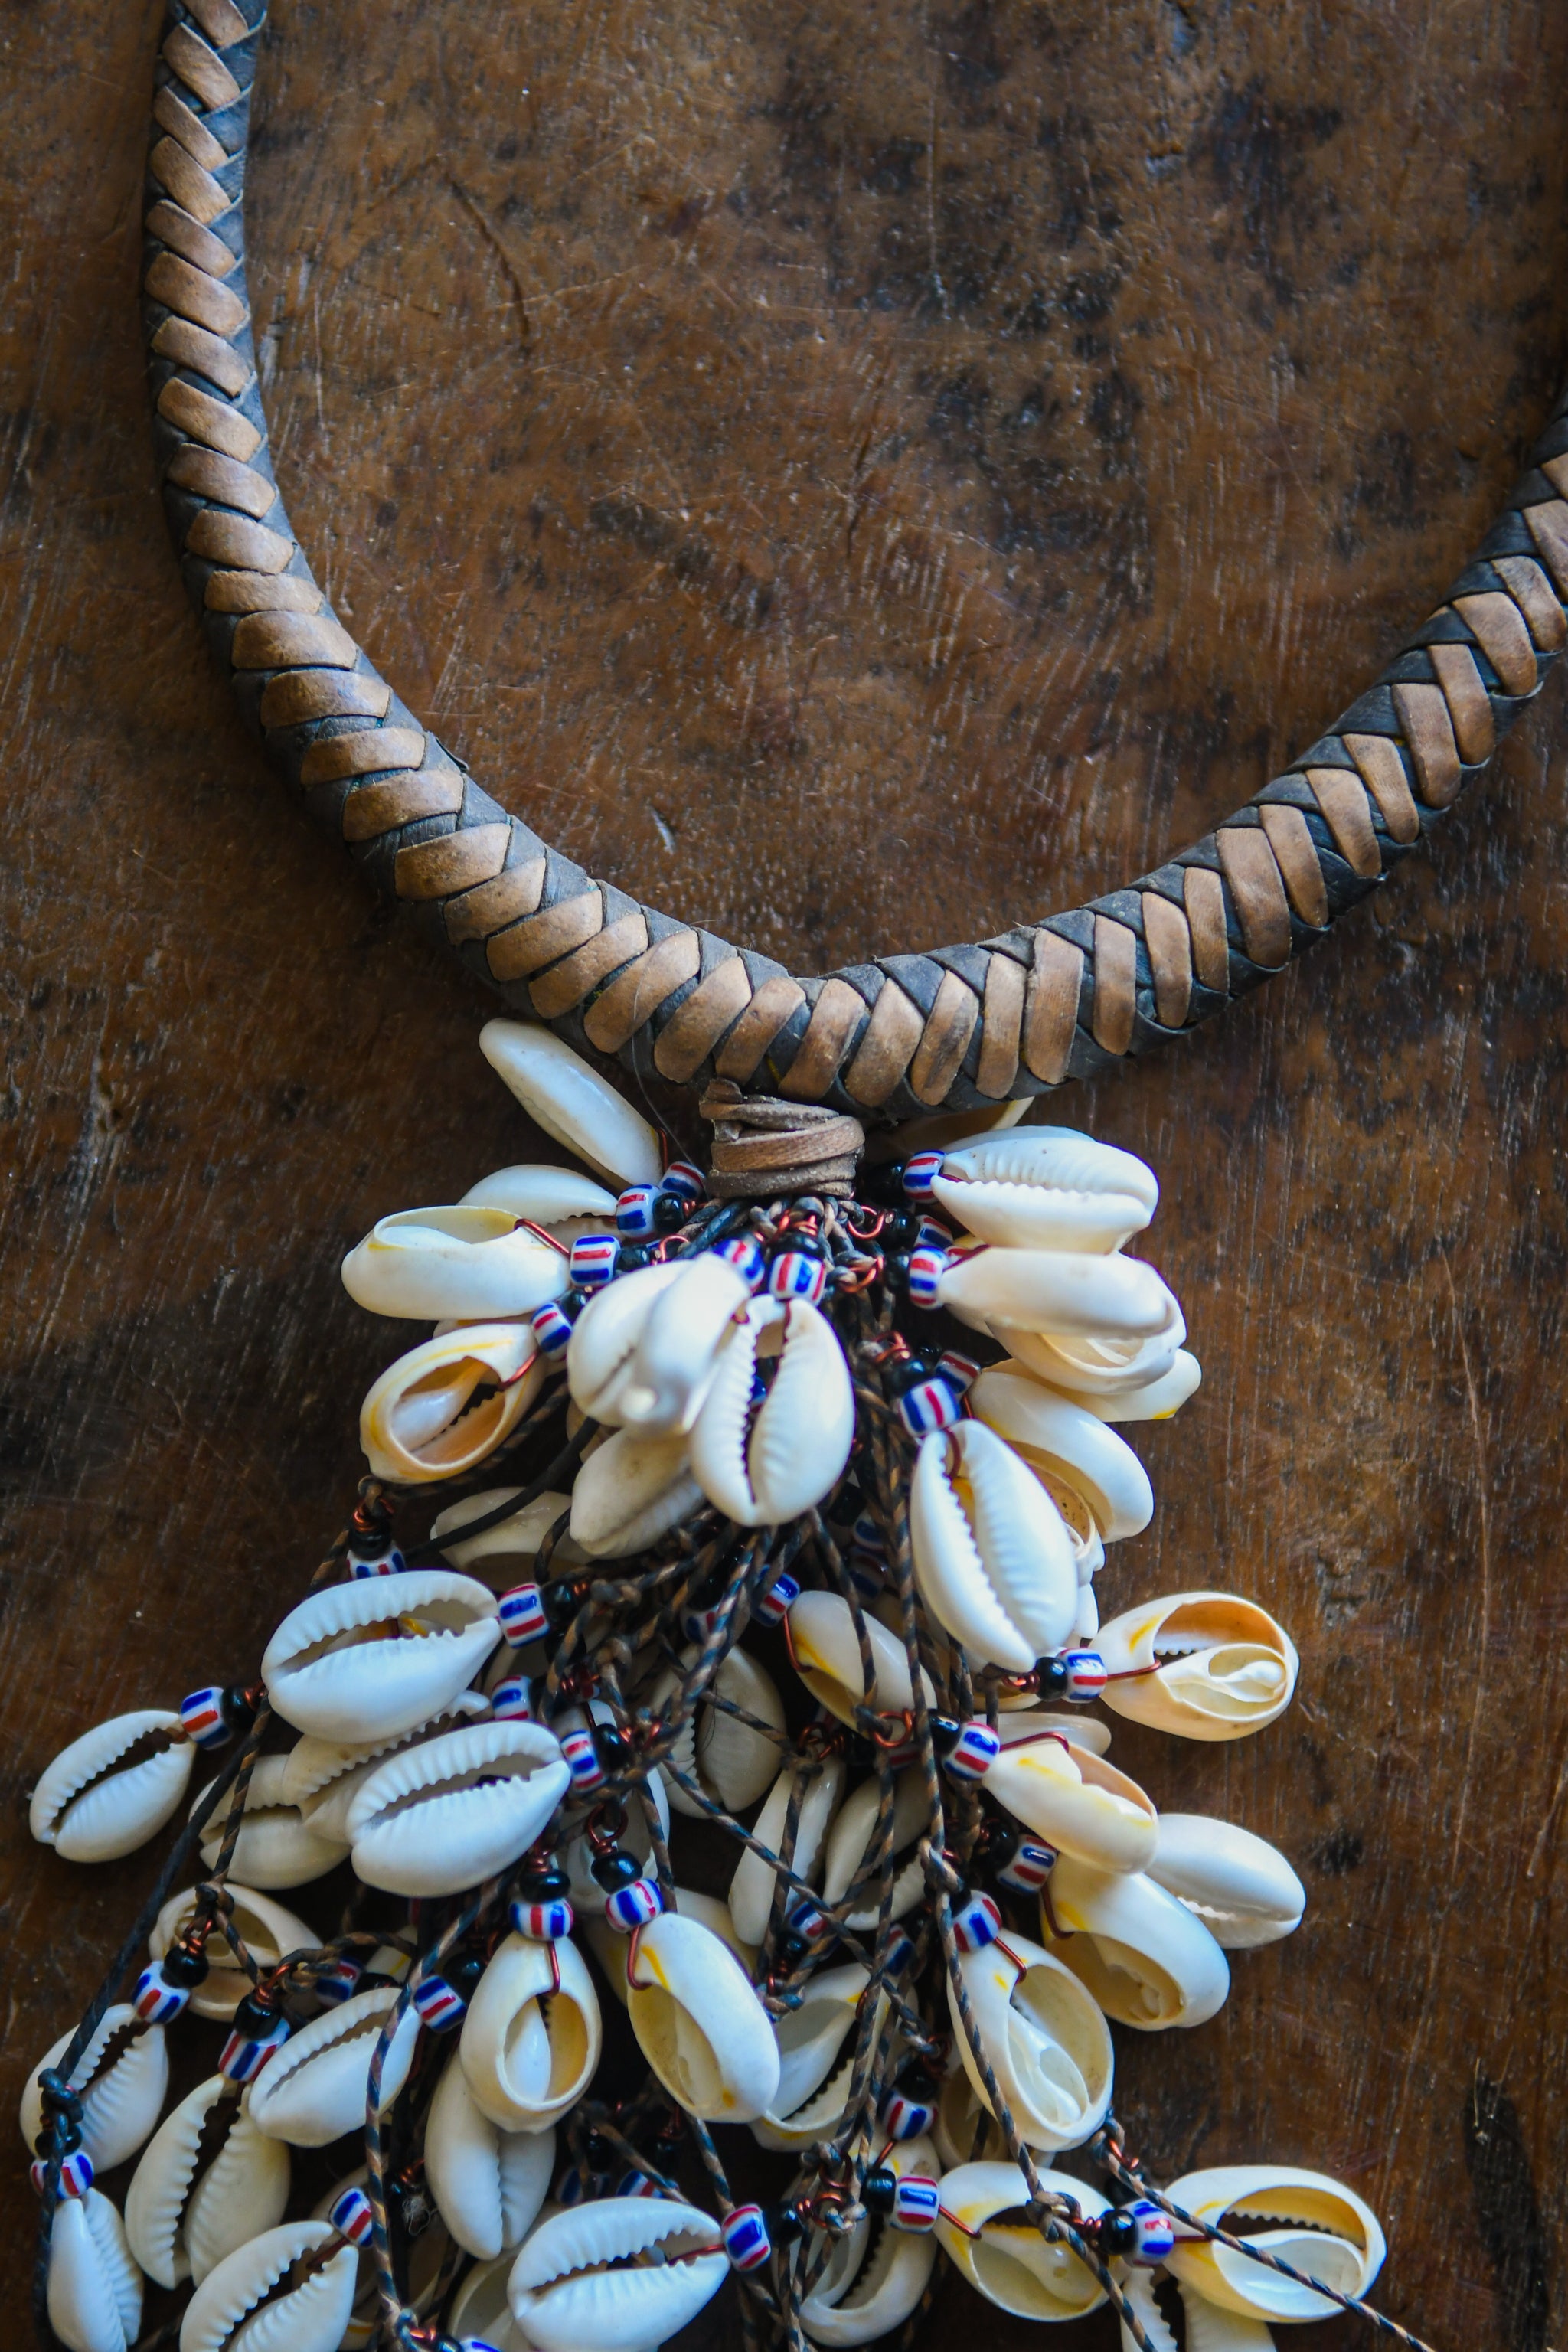 Tribal Necklaces - Handmade - African Art - Jewelry - Traditional - African Necklaces - Beaded - Collectible Necklaces - This African Tribal Cowrie Shell Necklace Pendant is a unique and timeless piece of jewelry crafted from an old Tribal Cowrie Shell pendant, leather necklace, and Venetian Chevron Trade Beads. Carefully handcrafted to last for years of enjoyment, it's a great way to show off your tribal culture in style. Length: 15 inches